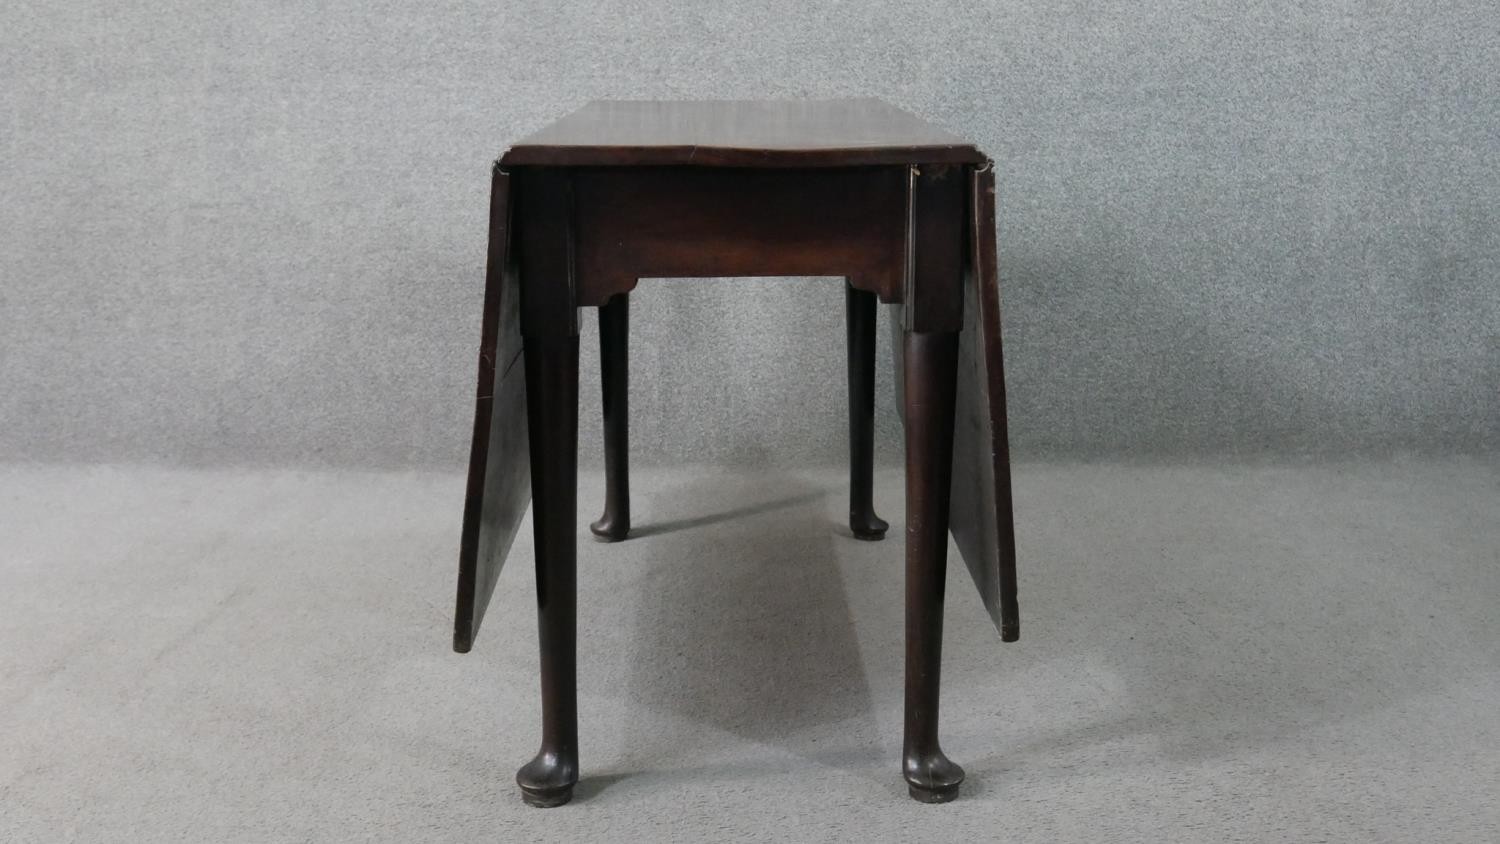 A mid 18th century mahogany drop leaf dining table, with a rectangular top, the legs with pad